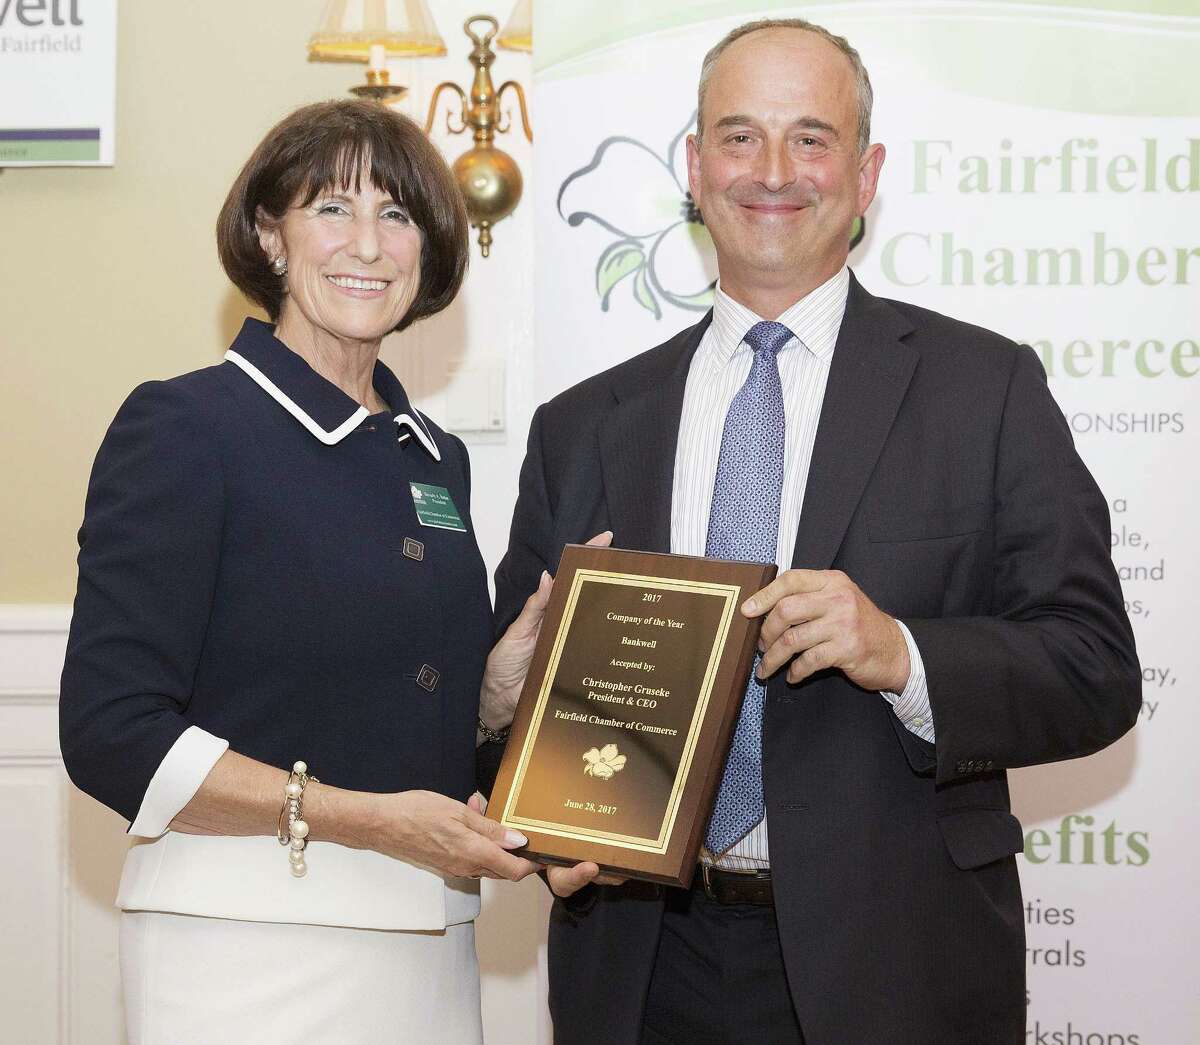 Fairfield Chamber of Commerce President Beverly Balaz, left, presents Bankwell President and CEO Christopher Gruseke with the chamber’s Company of the Year award.